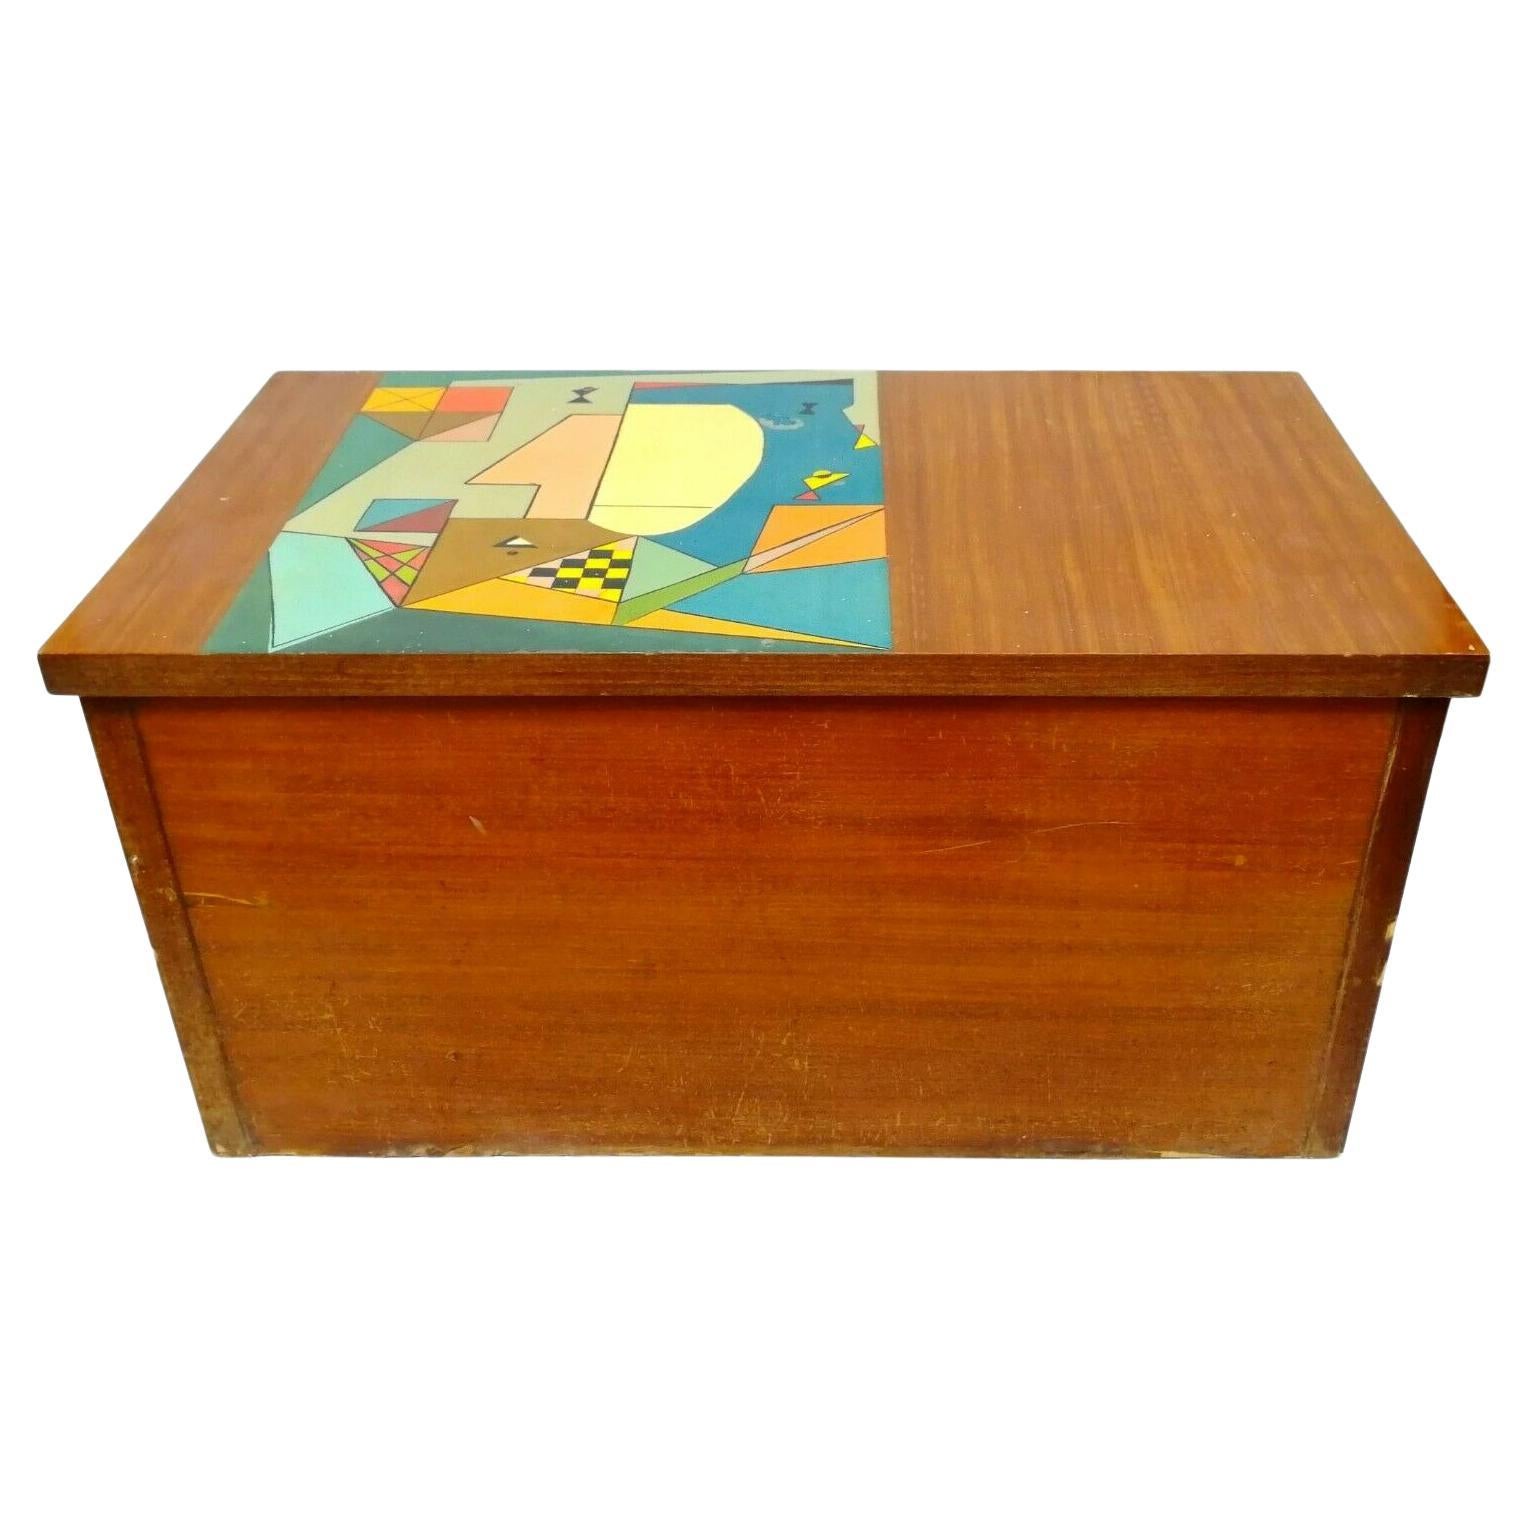 Vintage Small Chest in Wood with Futuristic Drawing, 1960s